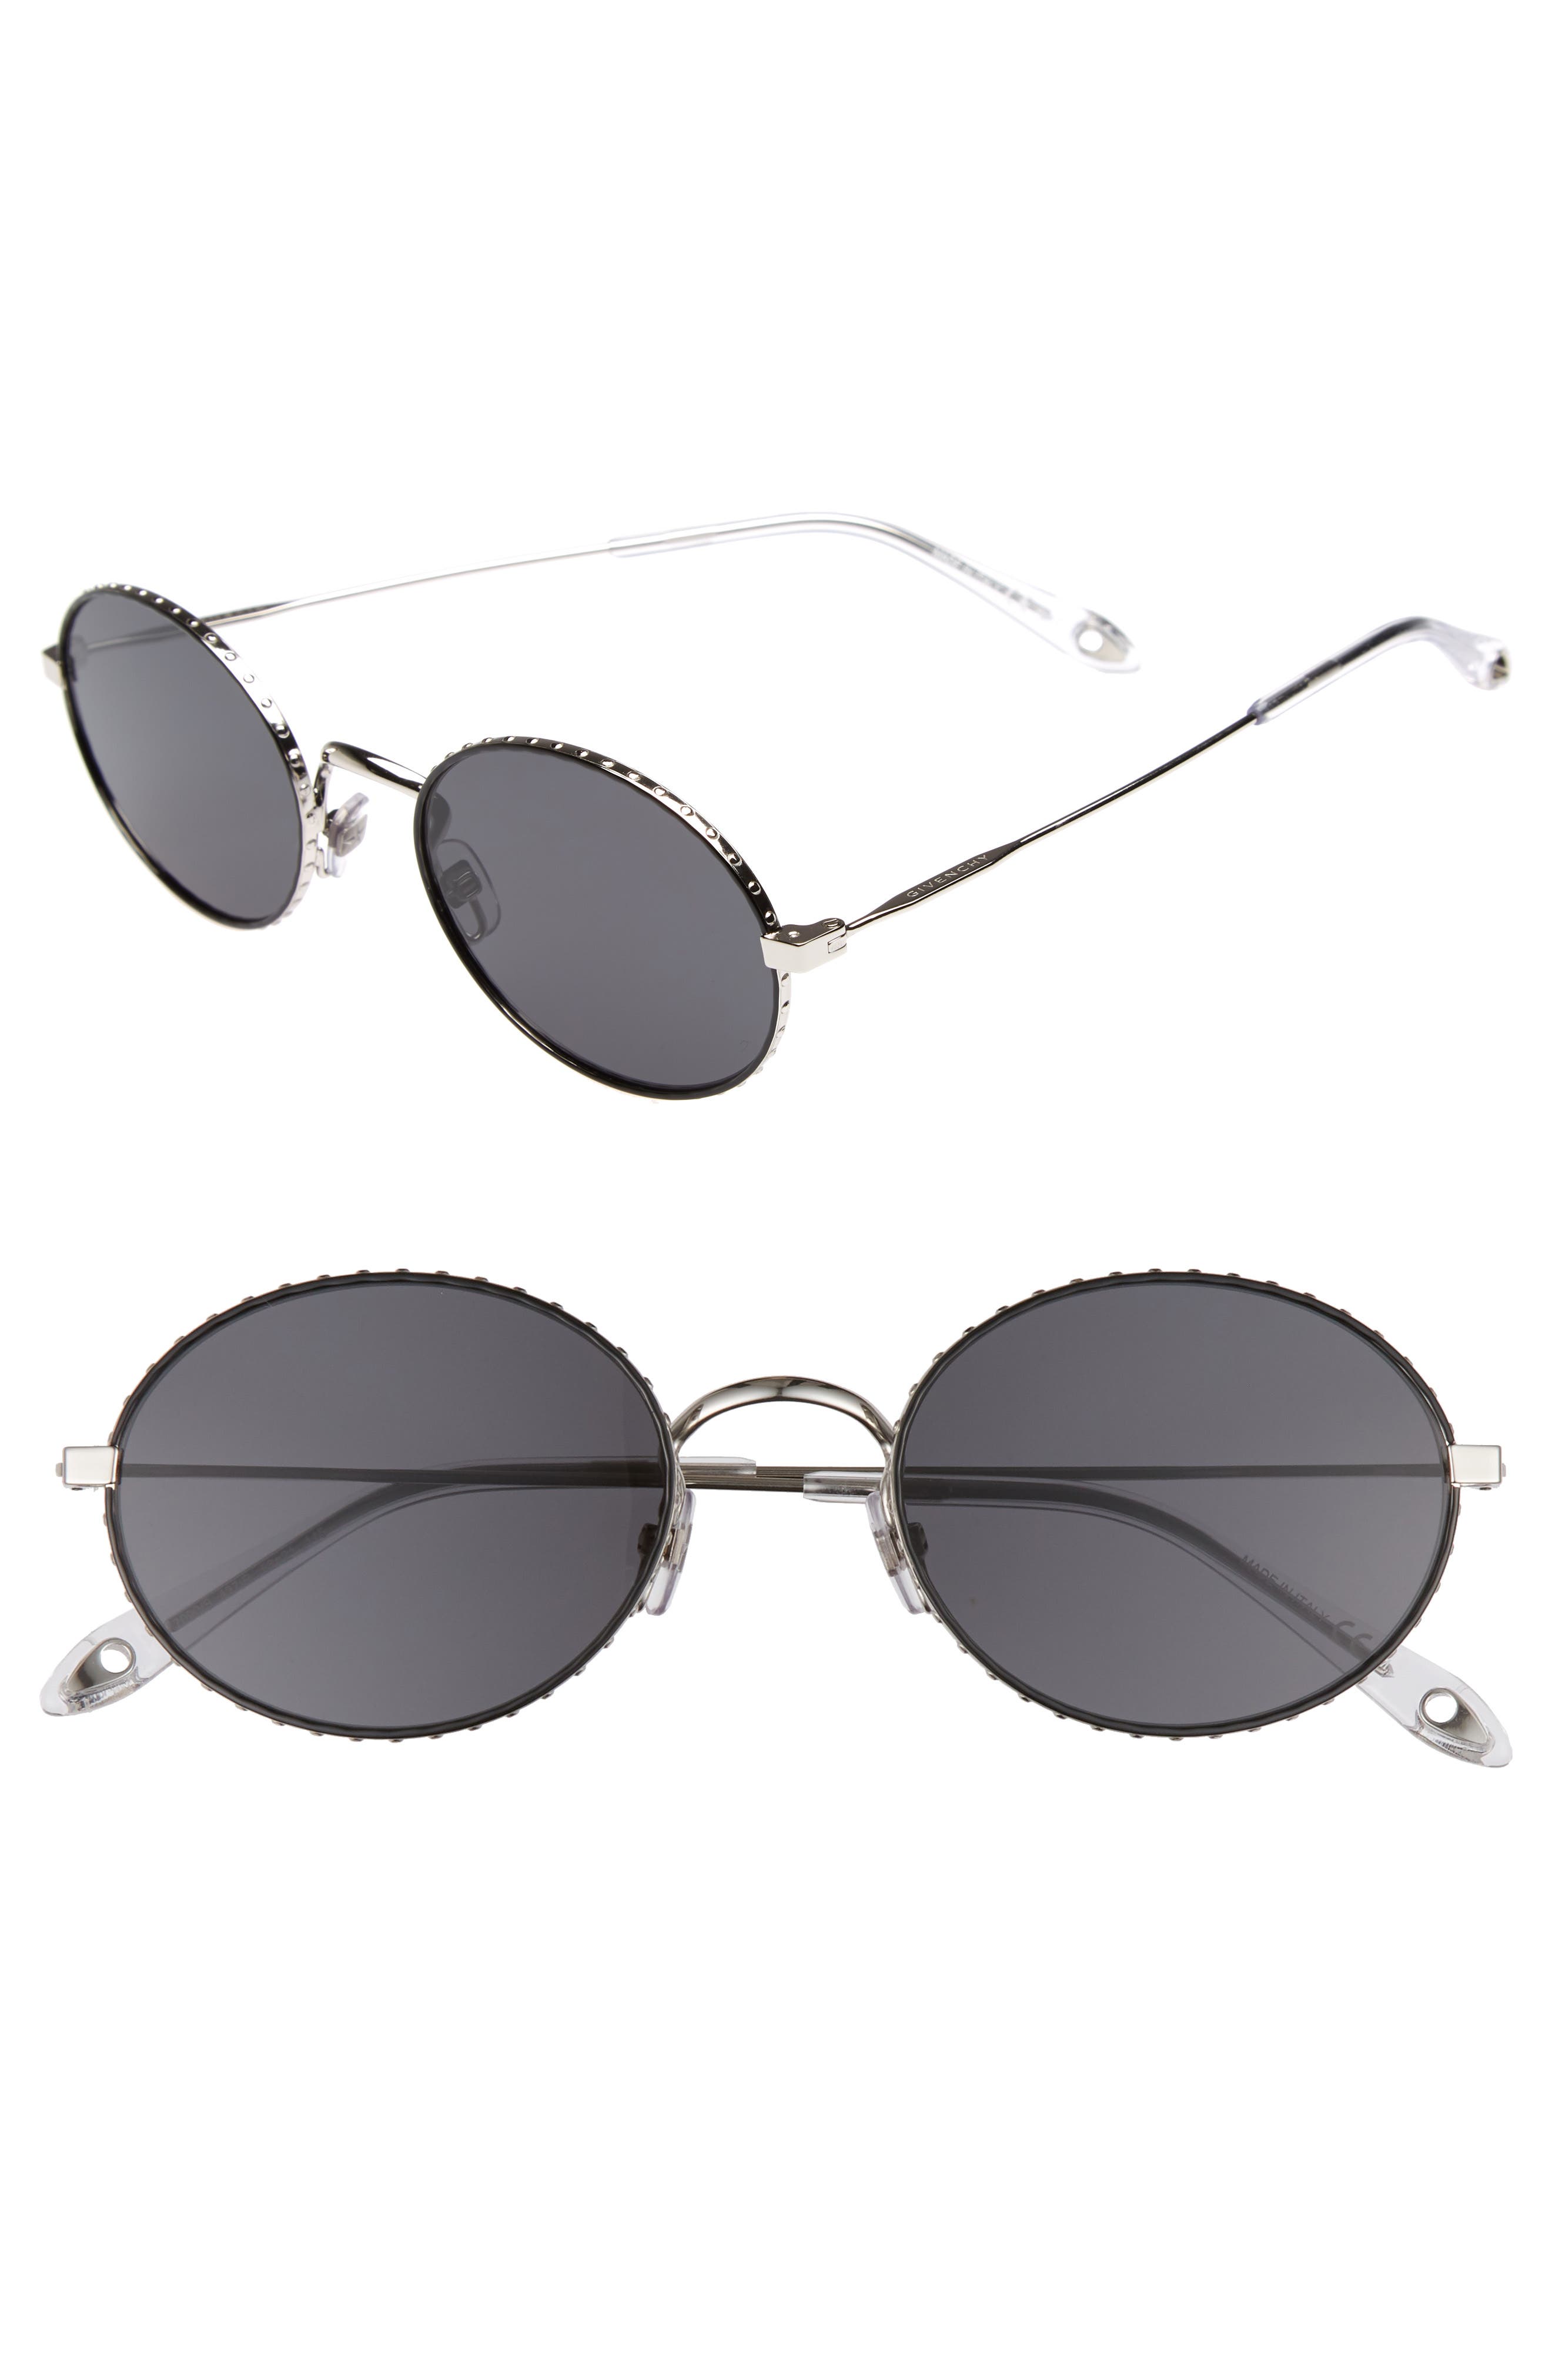 Givenchy 53mm Oval Sunglasses | Nordstrom